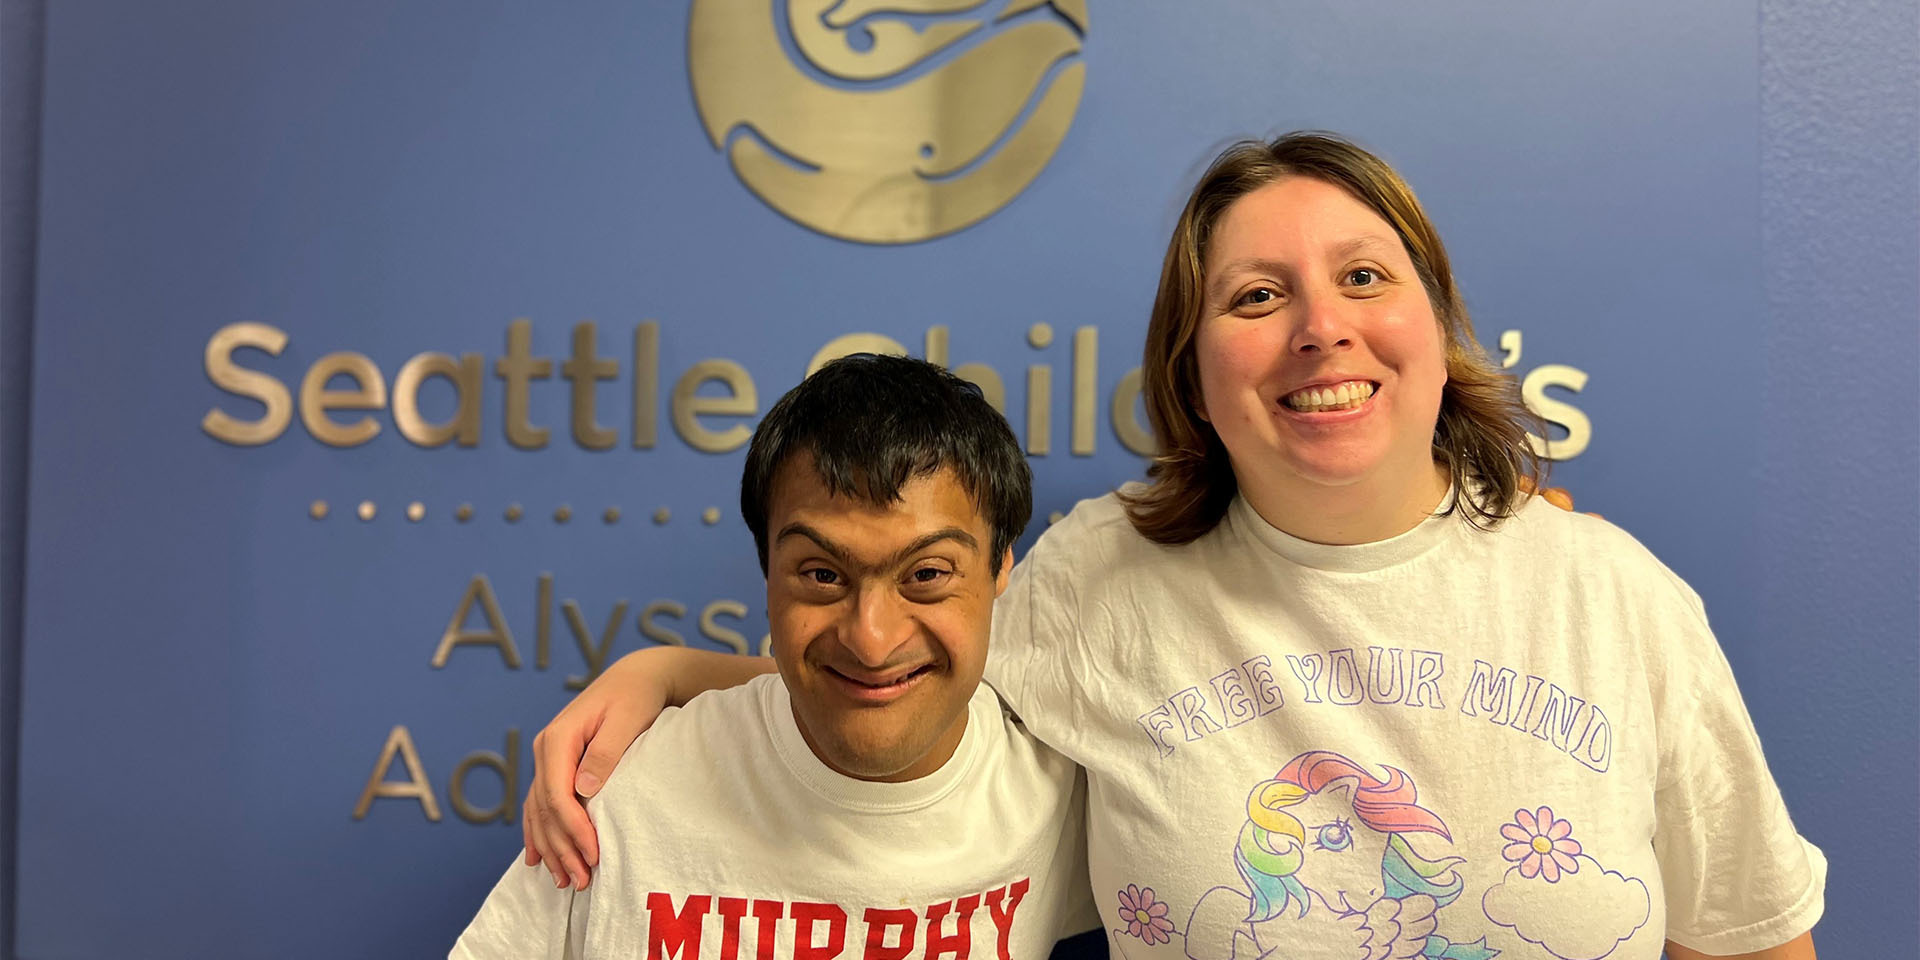 A male student and his caregiver stand in front of the Seattle Children's Alyssa Burnett Adult Life Center sign on a blue wall inside the center